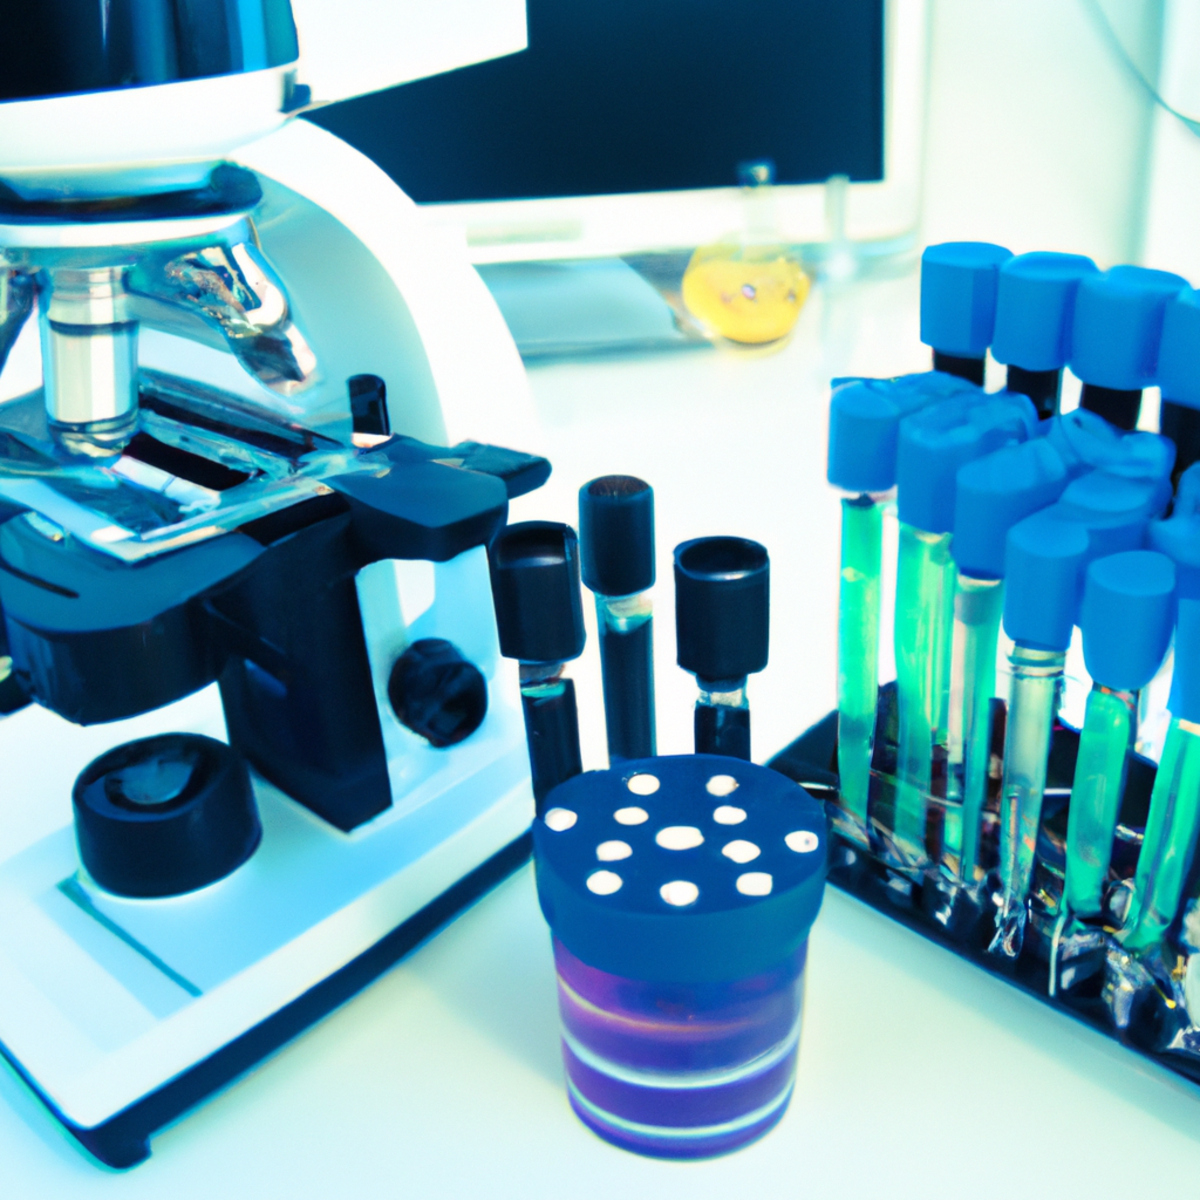 Vivid image of medical equipment used in genetic testing: DNA sequencing machine, microscope, test tubes, and genetic code sequence on a computer monitor.